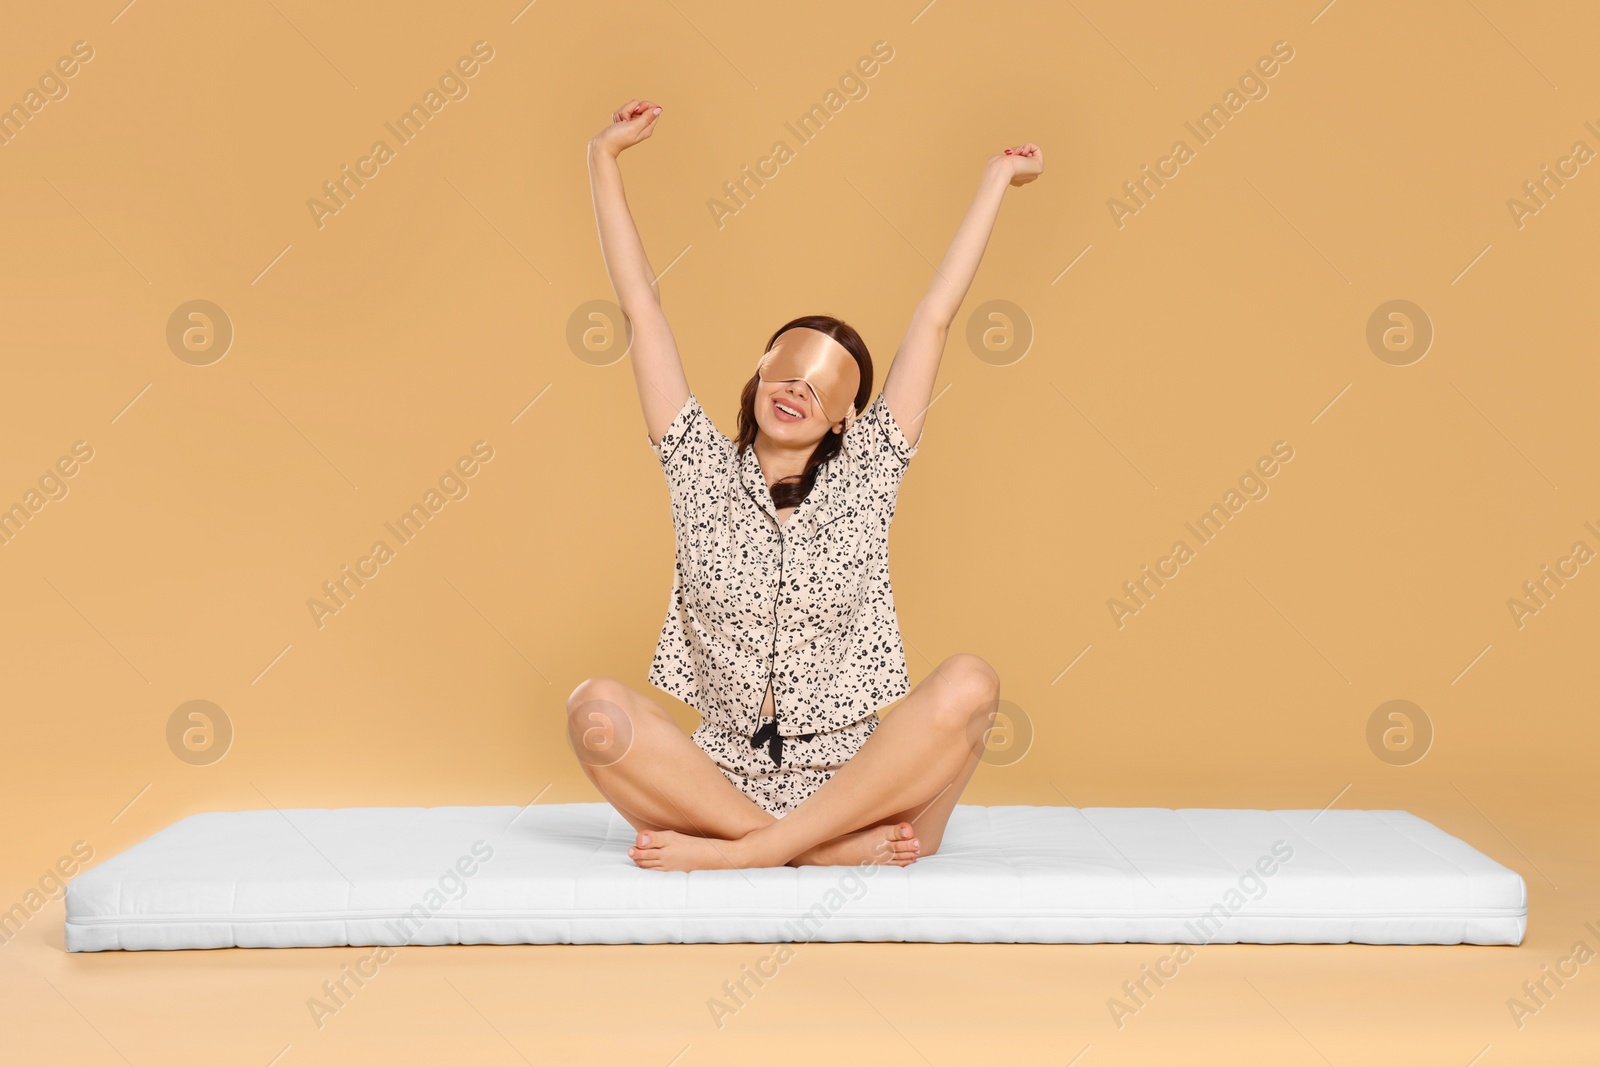 Photo of Woman in sleep mask stretching on soft mattress against beige background